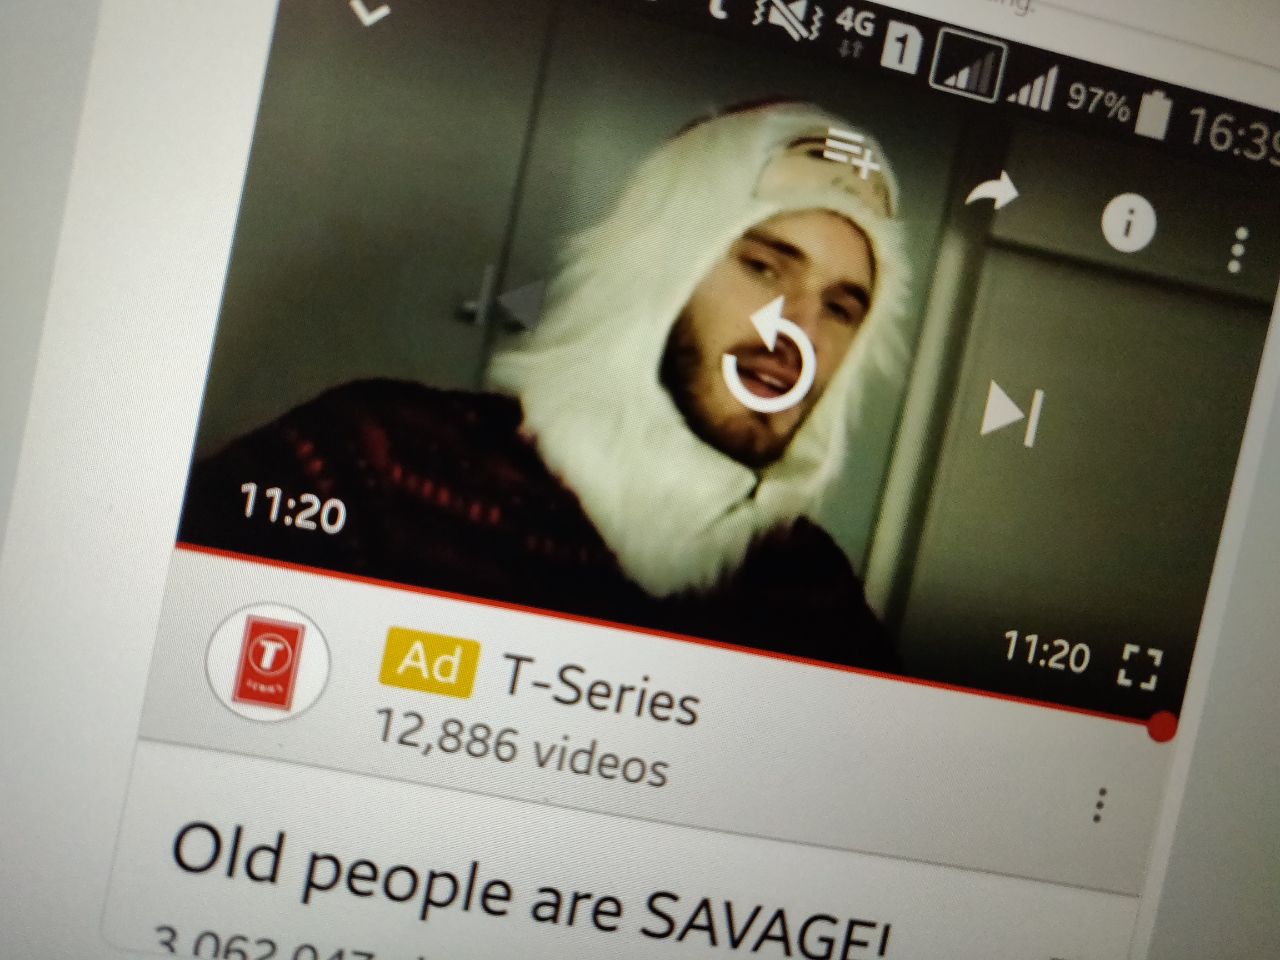 YouTube's spam subscription removal affected T-Series more than PewDiePie